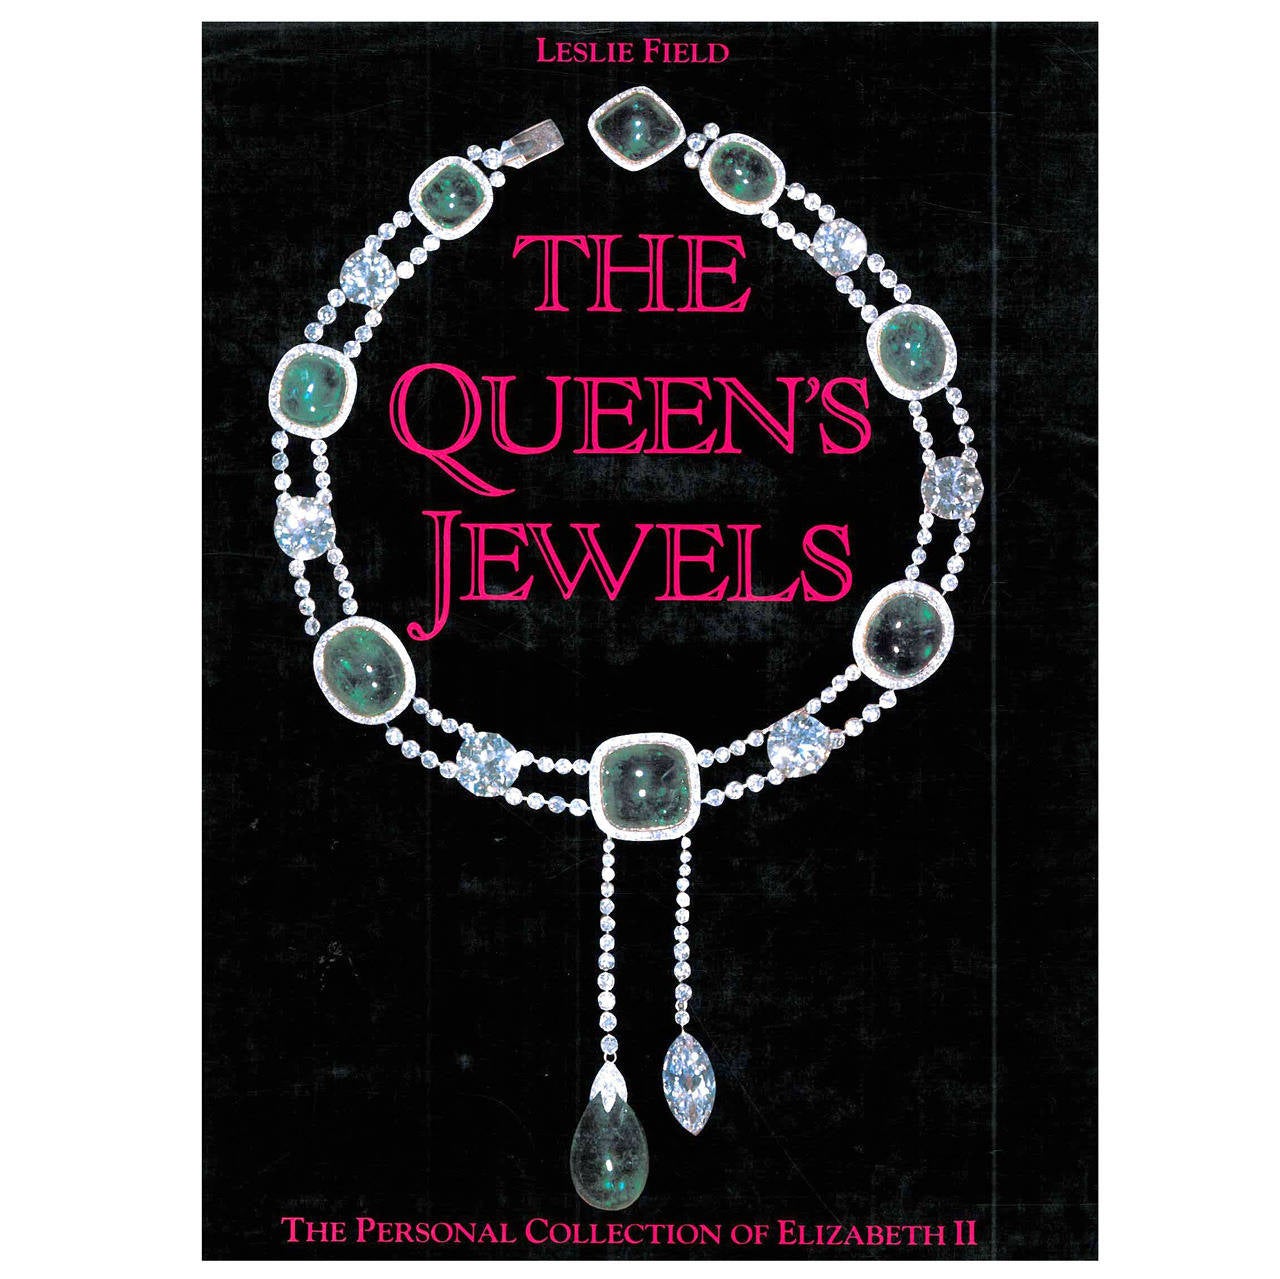 Book of THE QUEEN'S JEWELS - The Personal Collection of Elizabeth ll